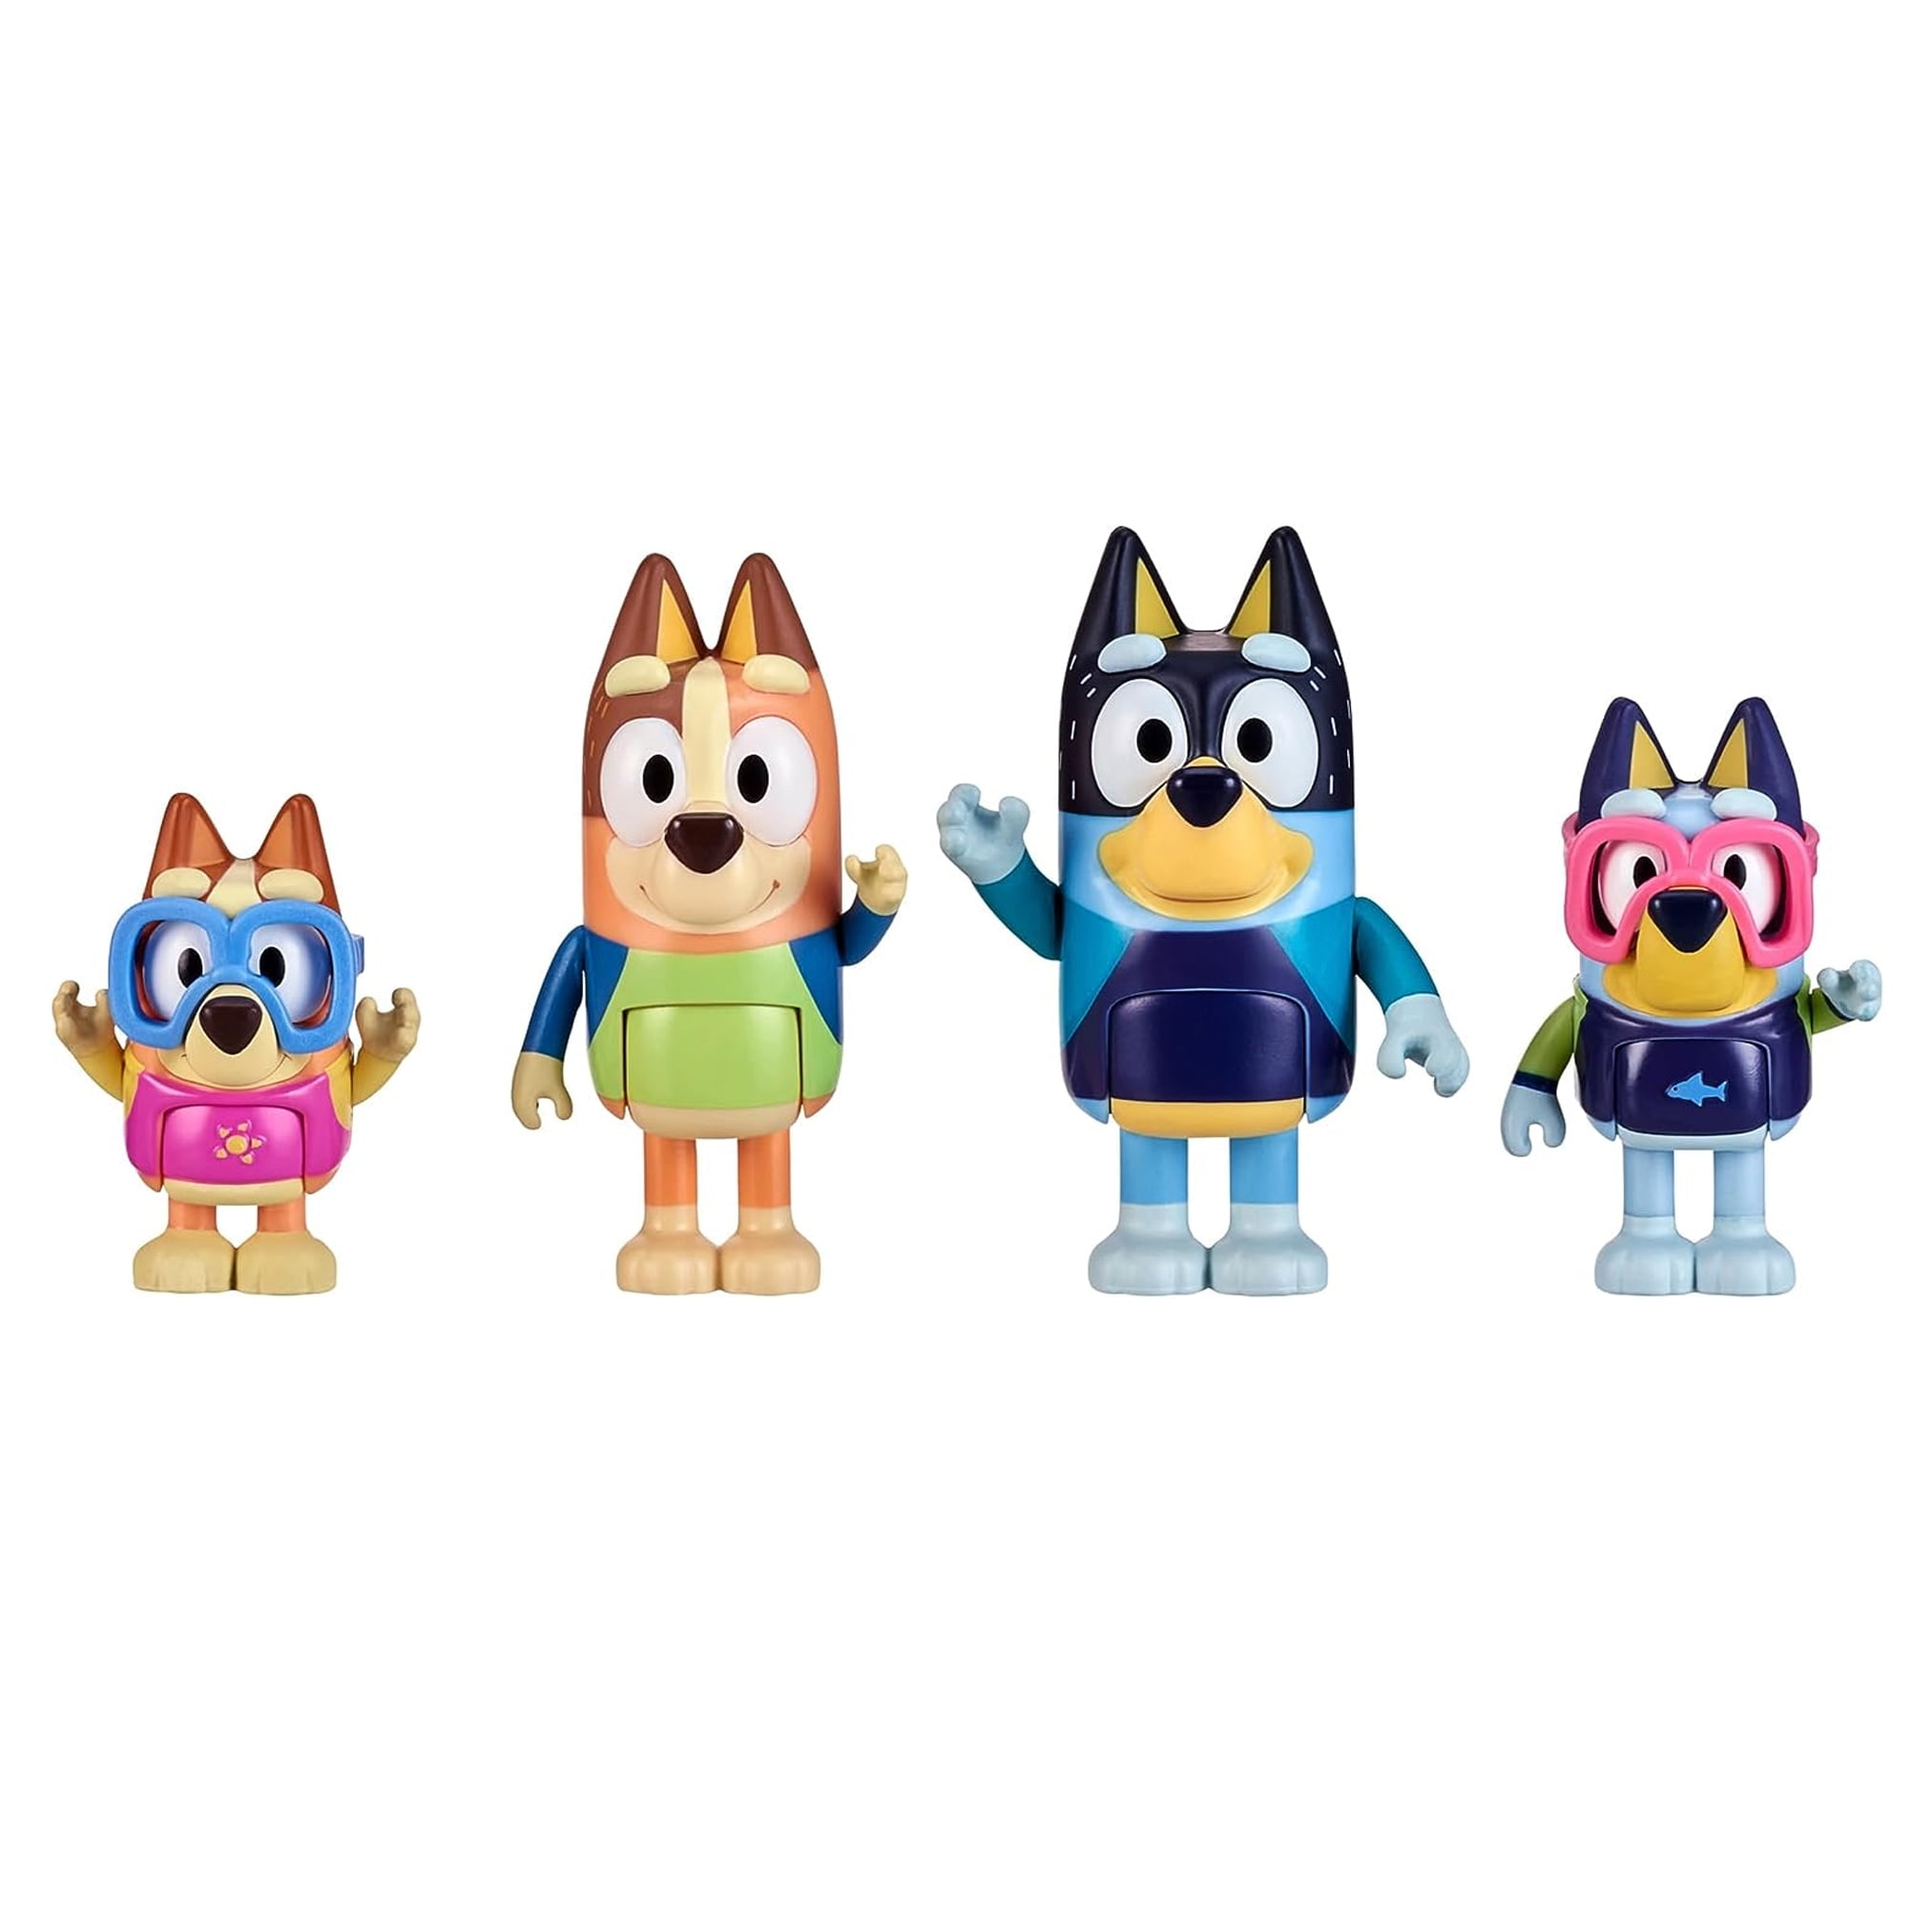 Bluey and Friends 4 Pack of 2.5-3 Dog  Poseable Figures (13052), School  4-pack